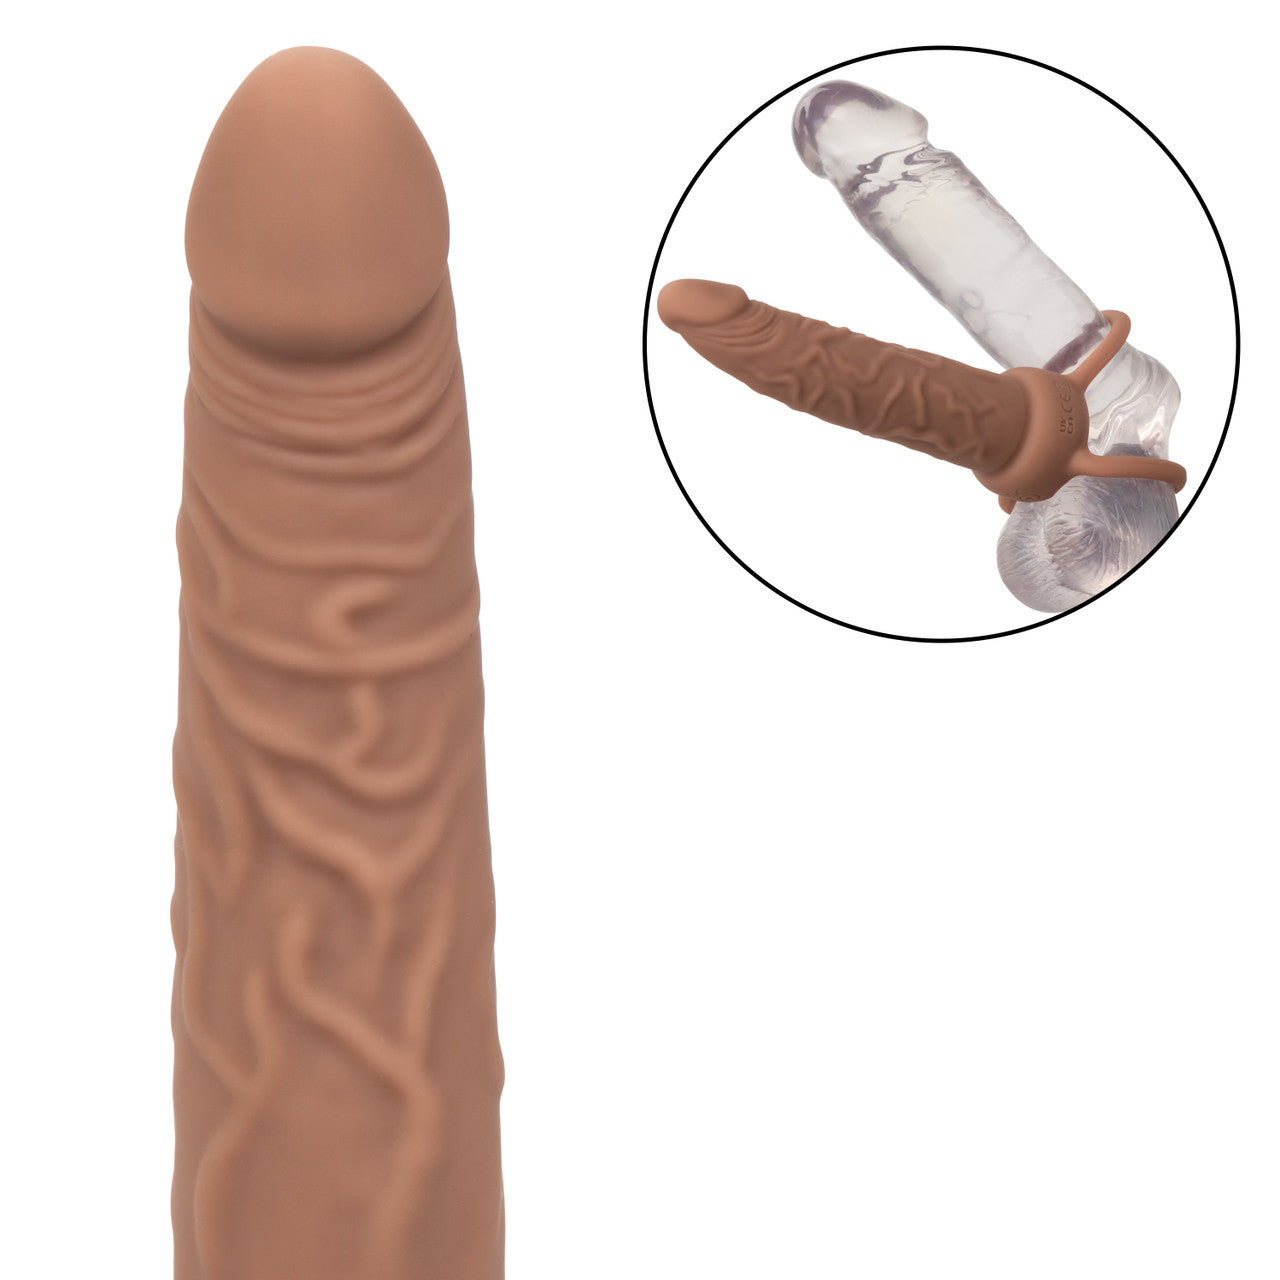 Performance Maxx Rechargeable Dual Ring Penetrator